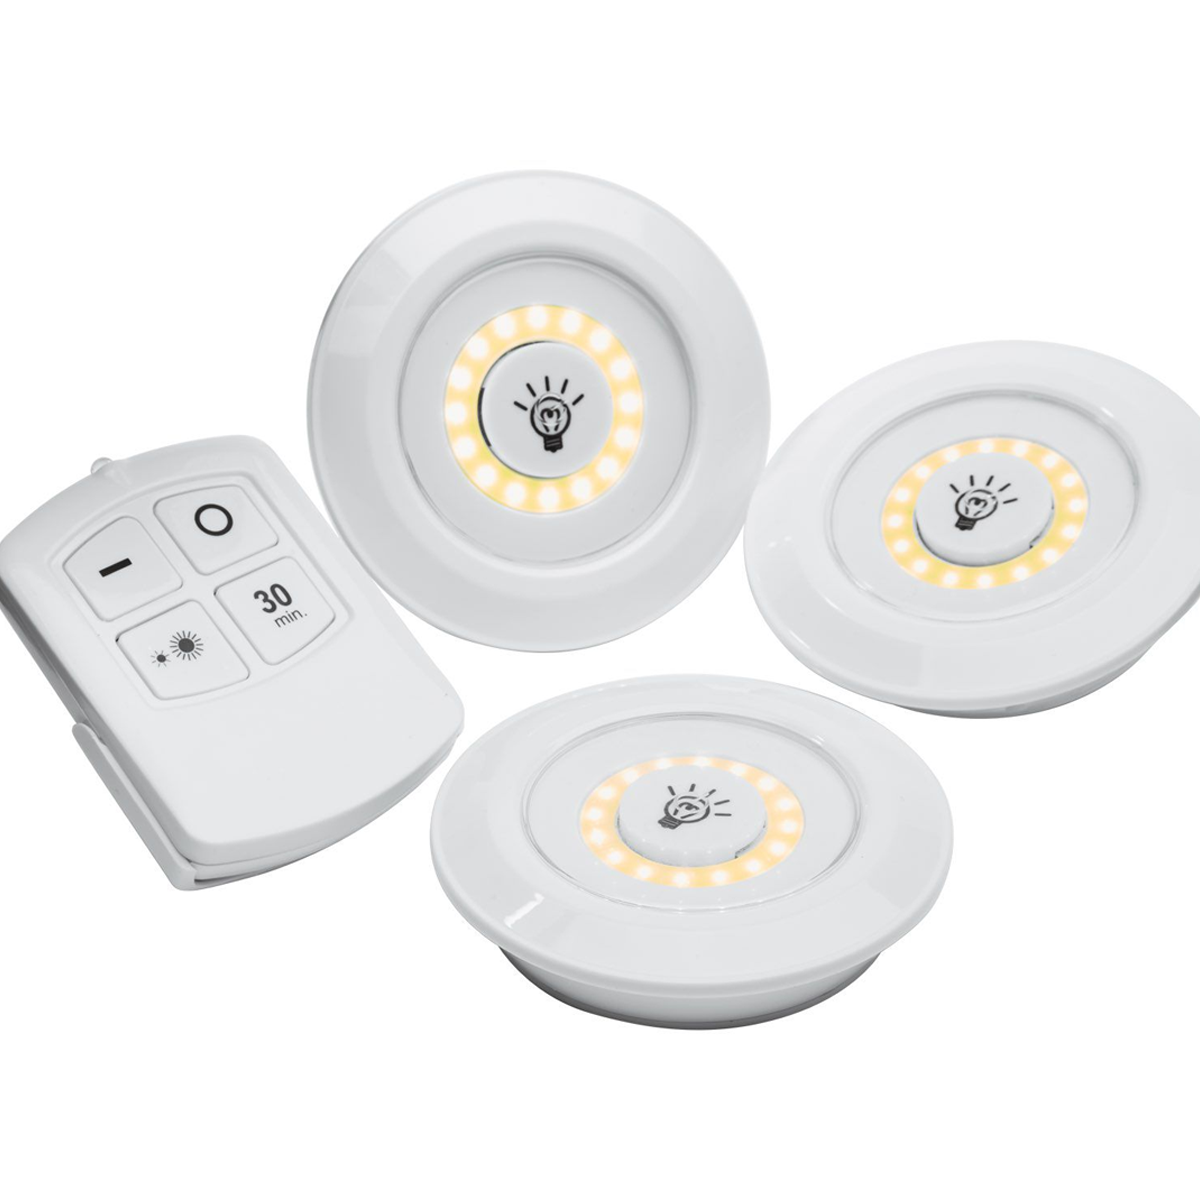 Led Light With Remote Control - 3 Pcs